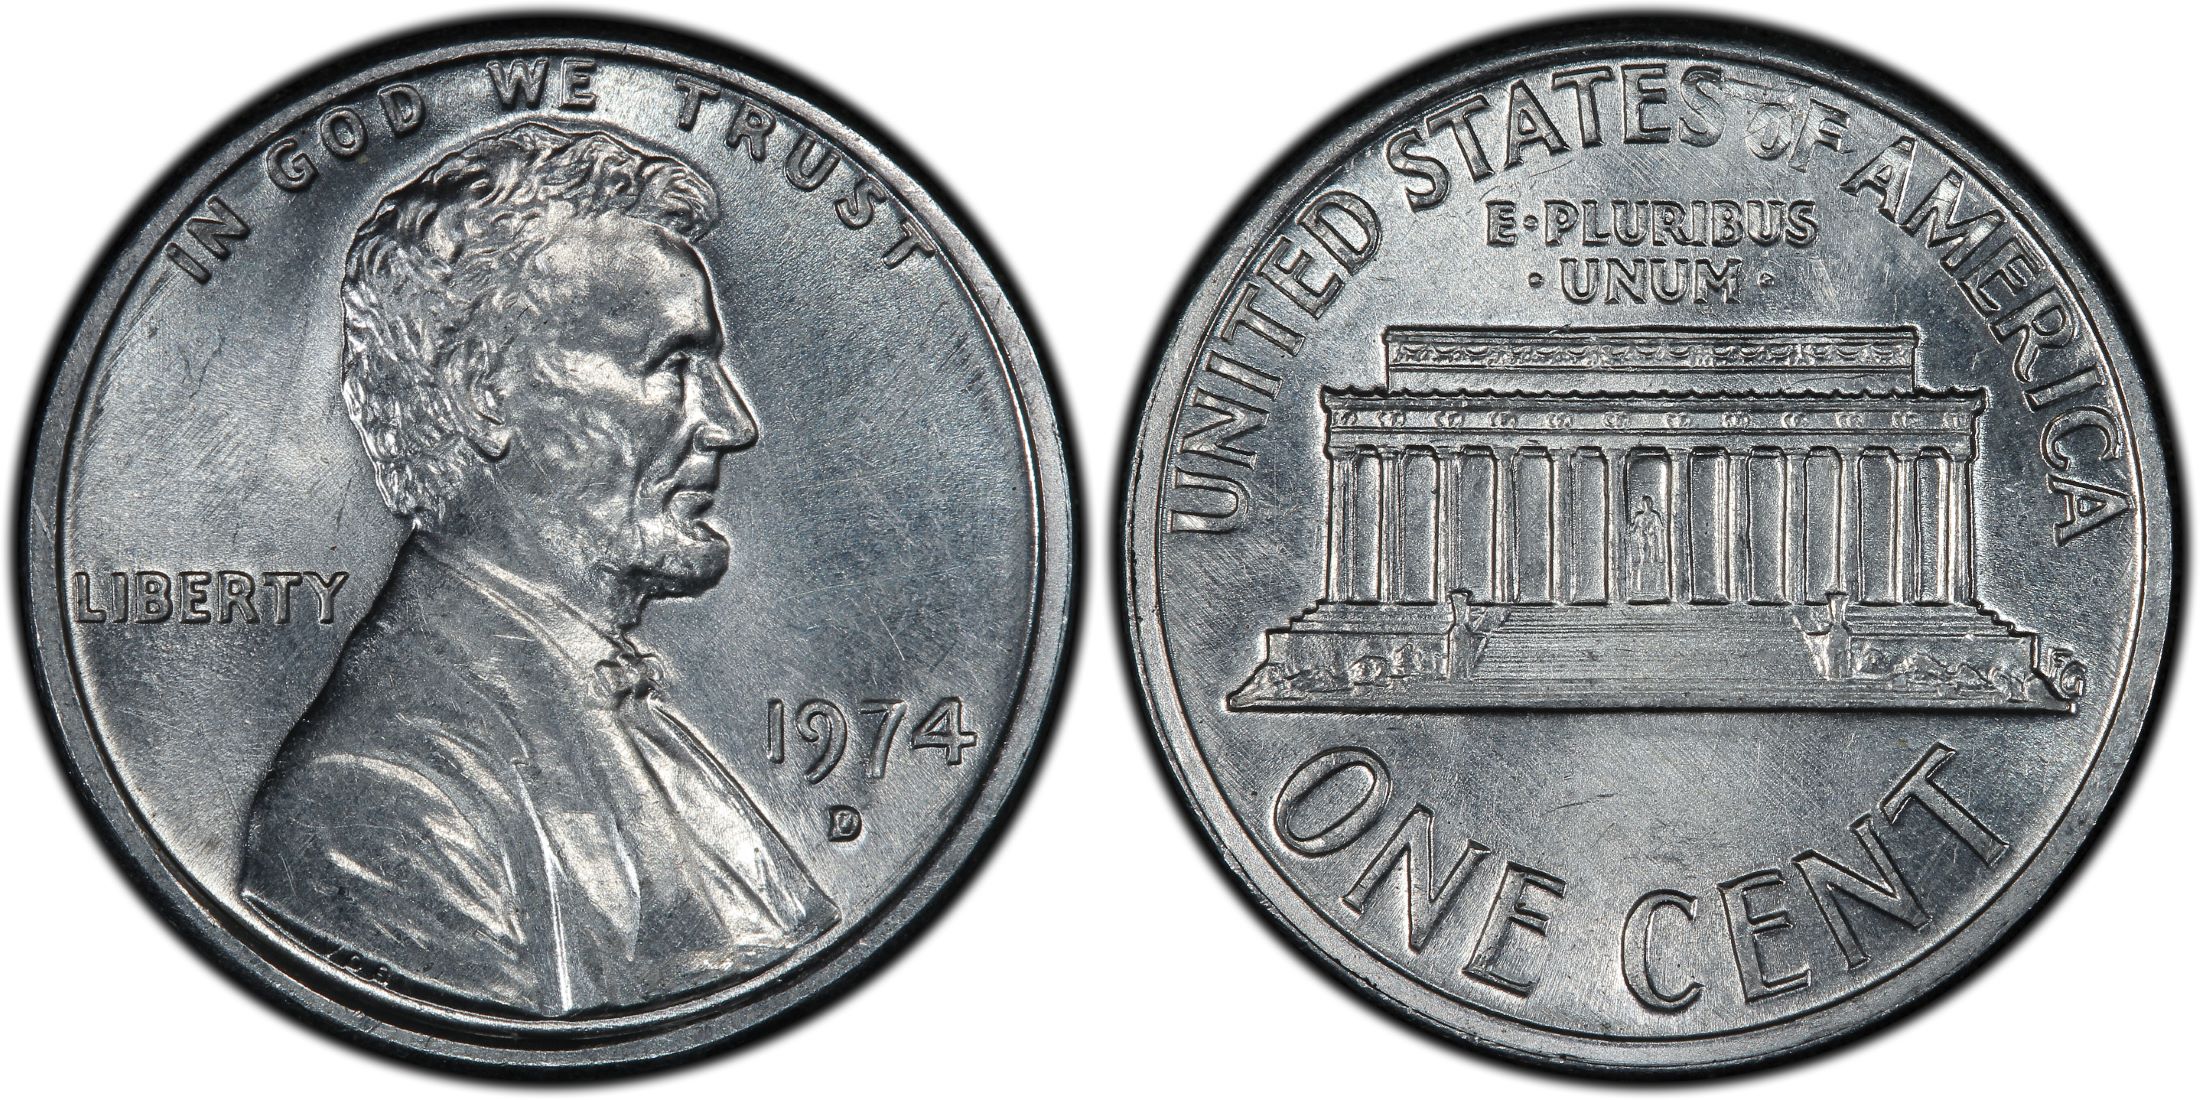 How Significant Coins are for Collectors